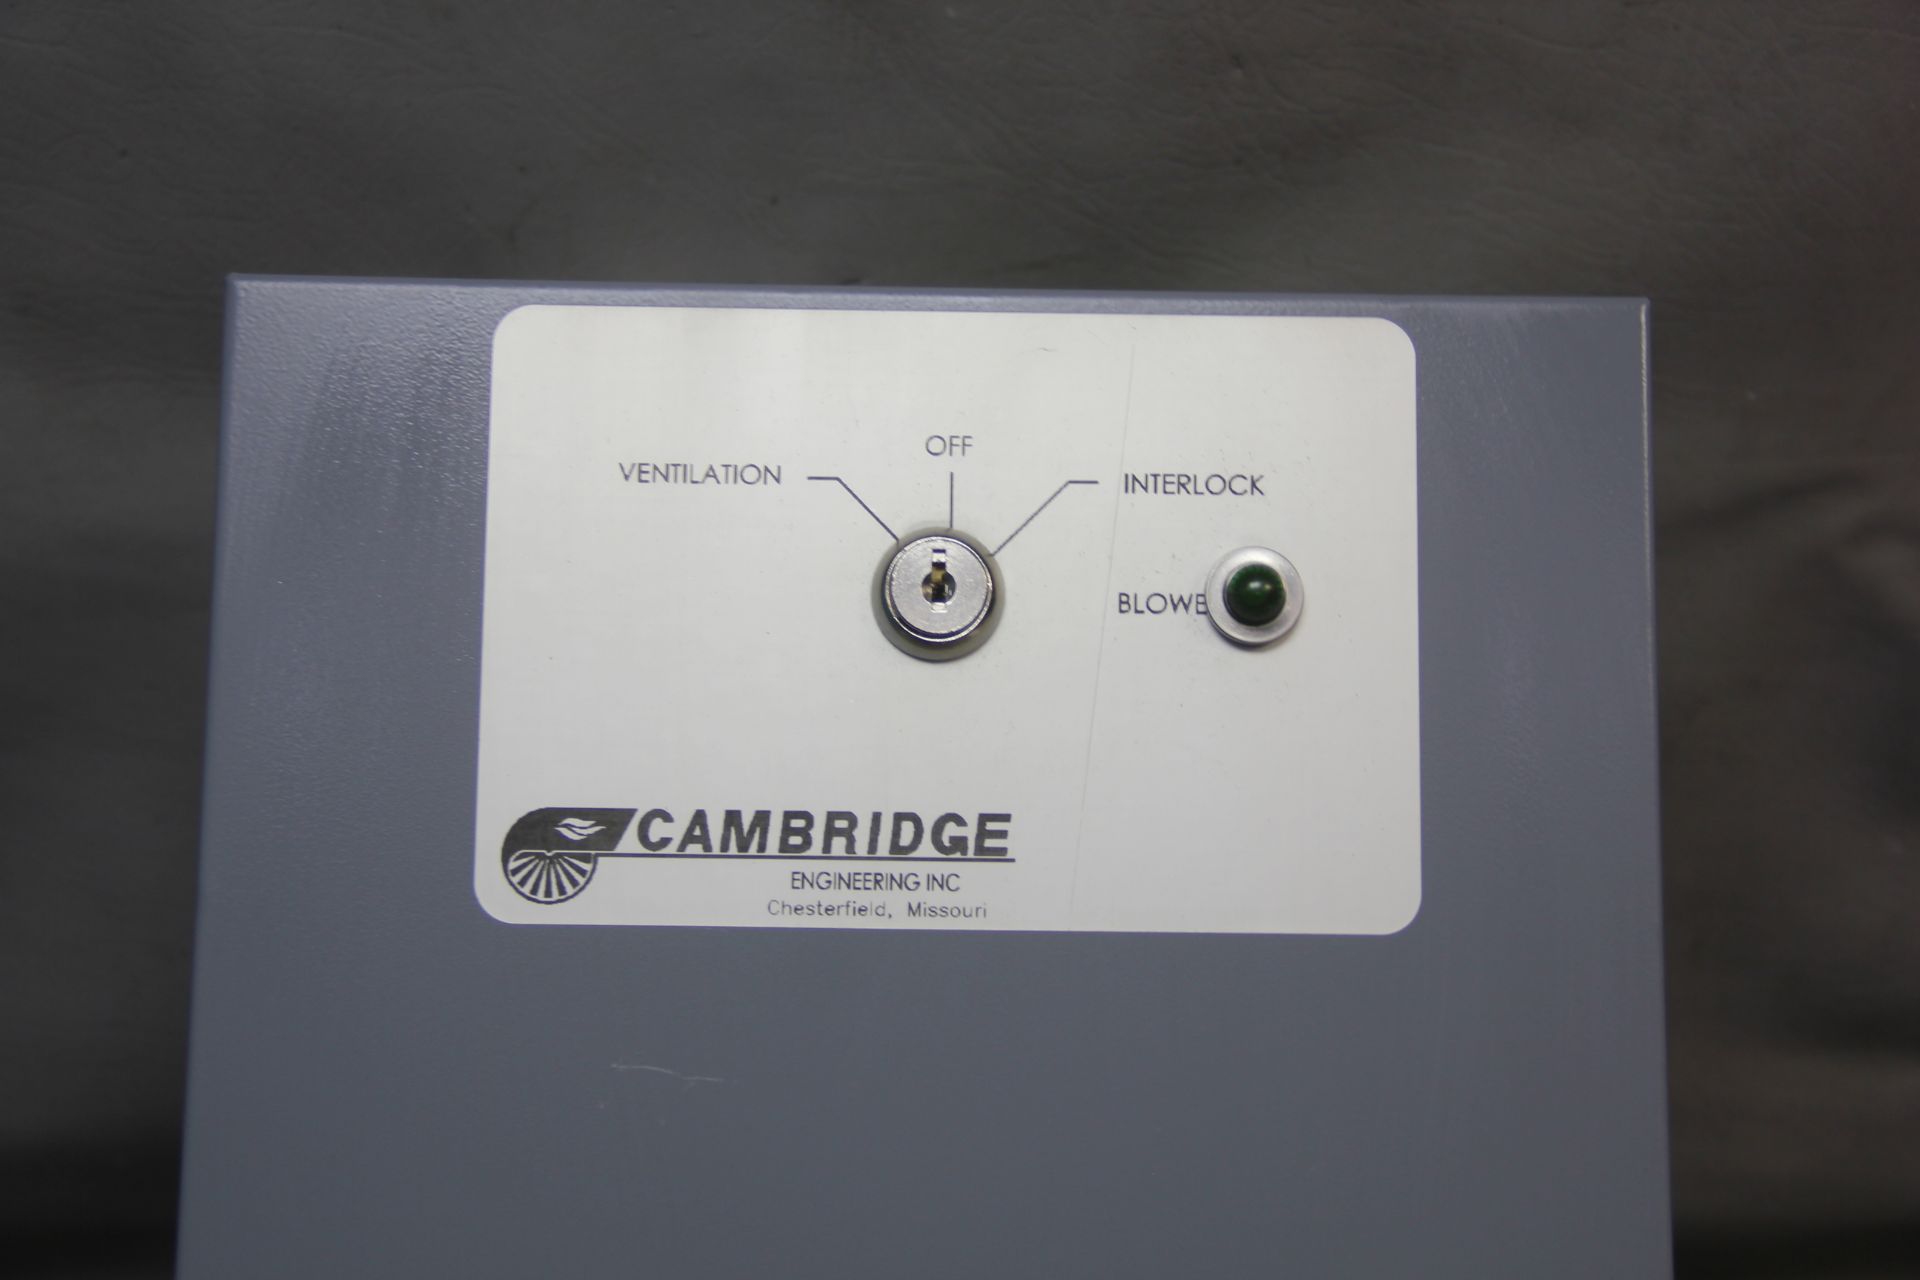 NEW CAMBRIDGE THERMOSTAT REMOTE STATION CONTROL IN ENCLOSURE - Image 3 of 10